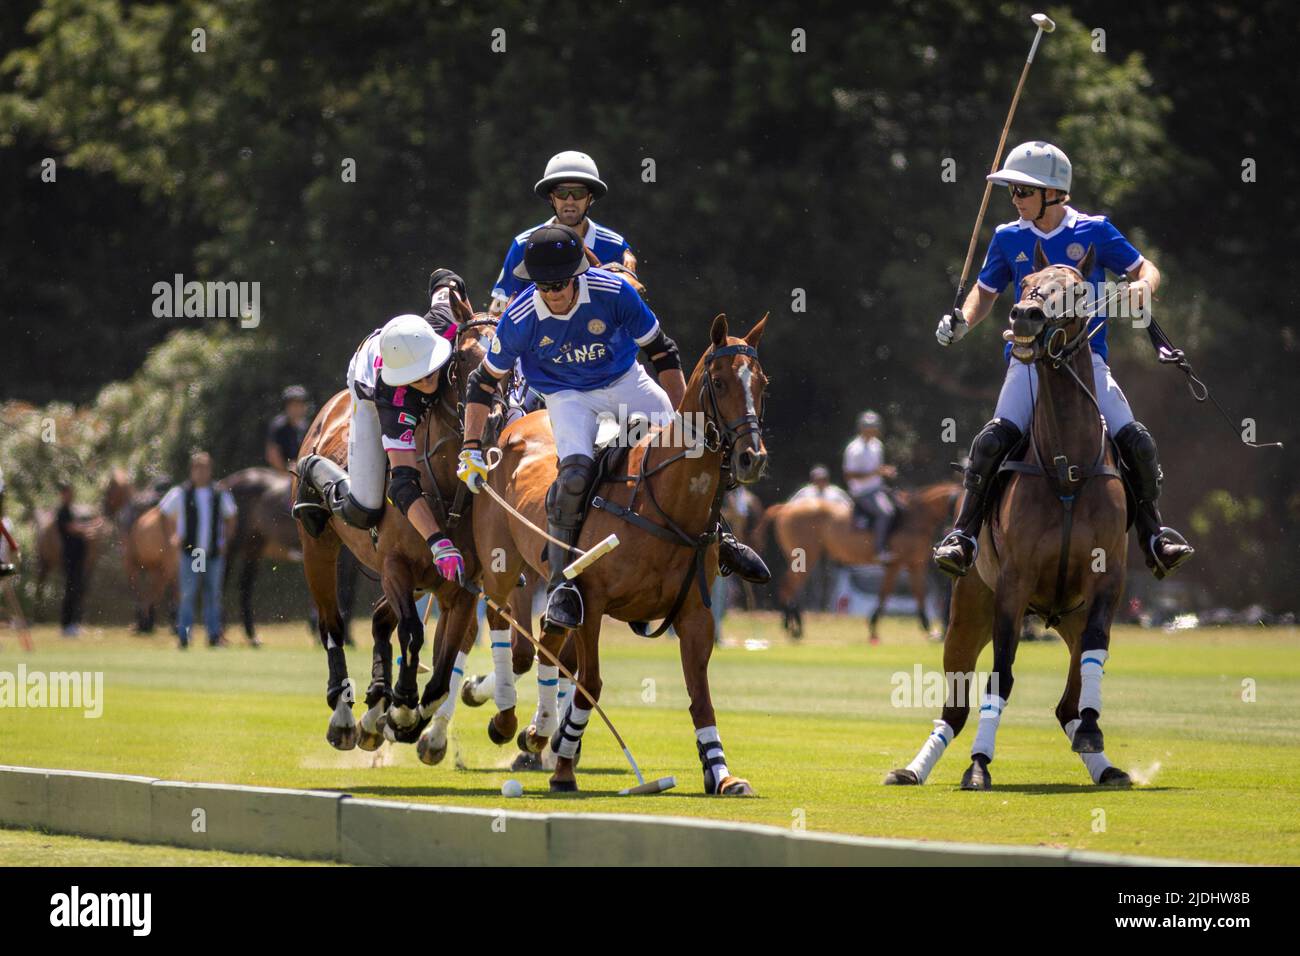 Tomas Beresford of UAE stretches for the ball towards  James Harper of King Power (in blue) at Cowdray Park Polo Club in Midhurst, West Sussex during Stock Photo